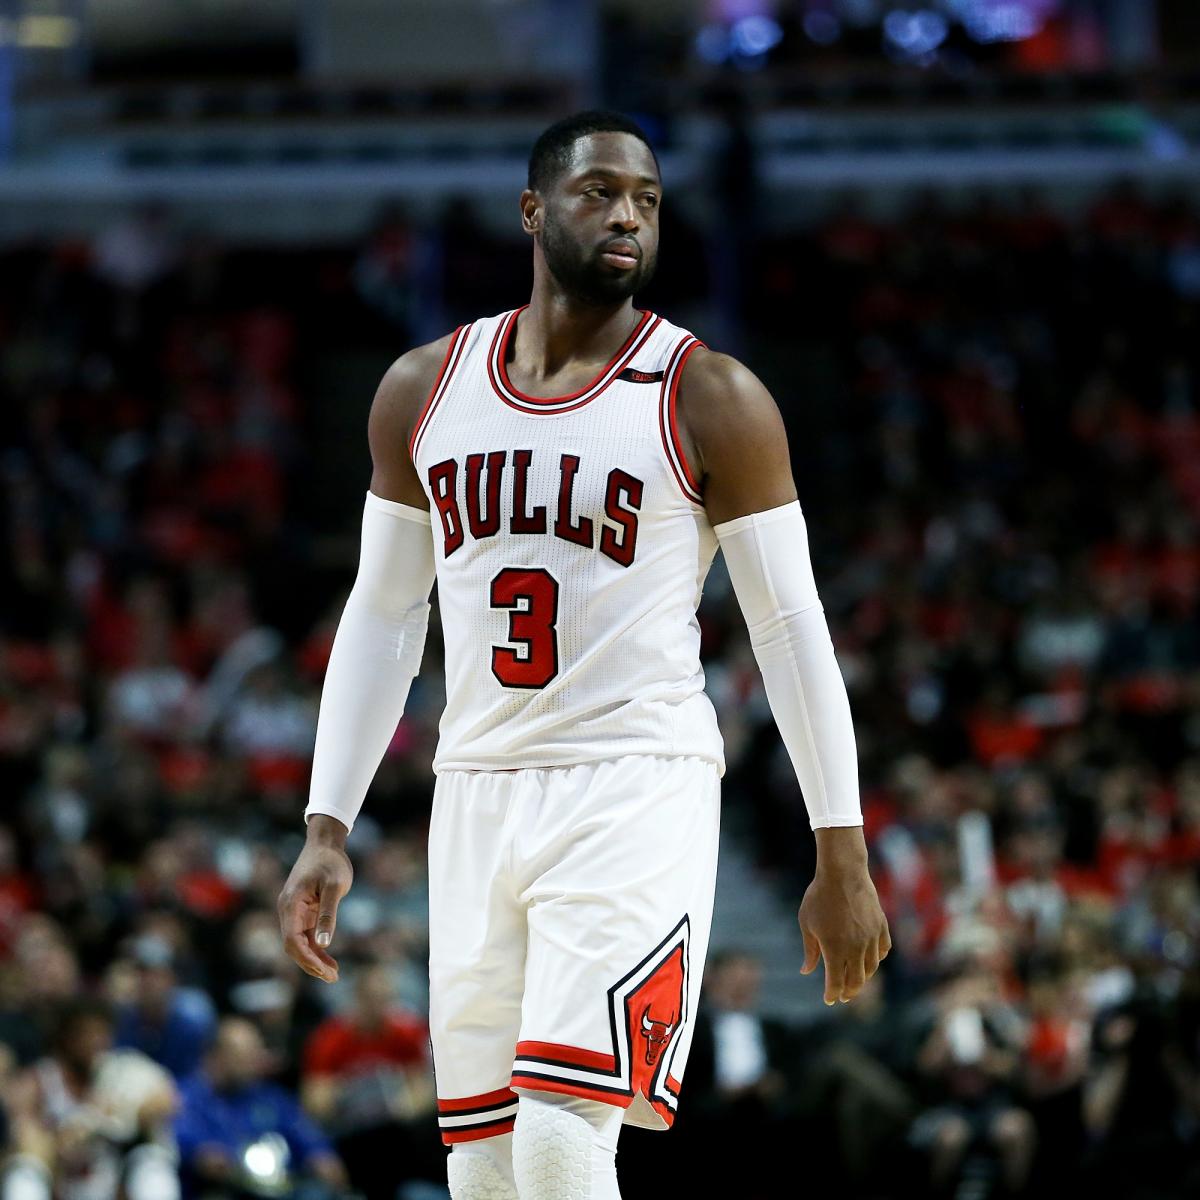 Dwyane Wade's newly found 3-point shot is the key to the Bulls' season